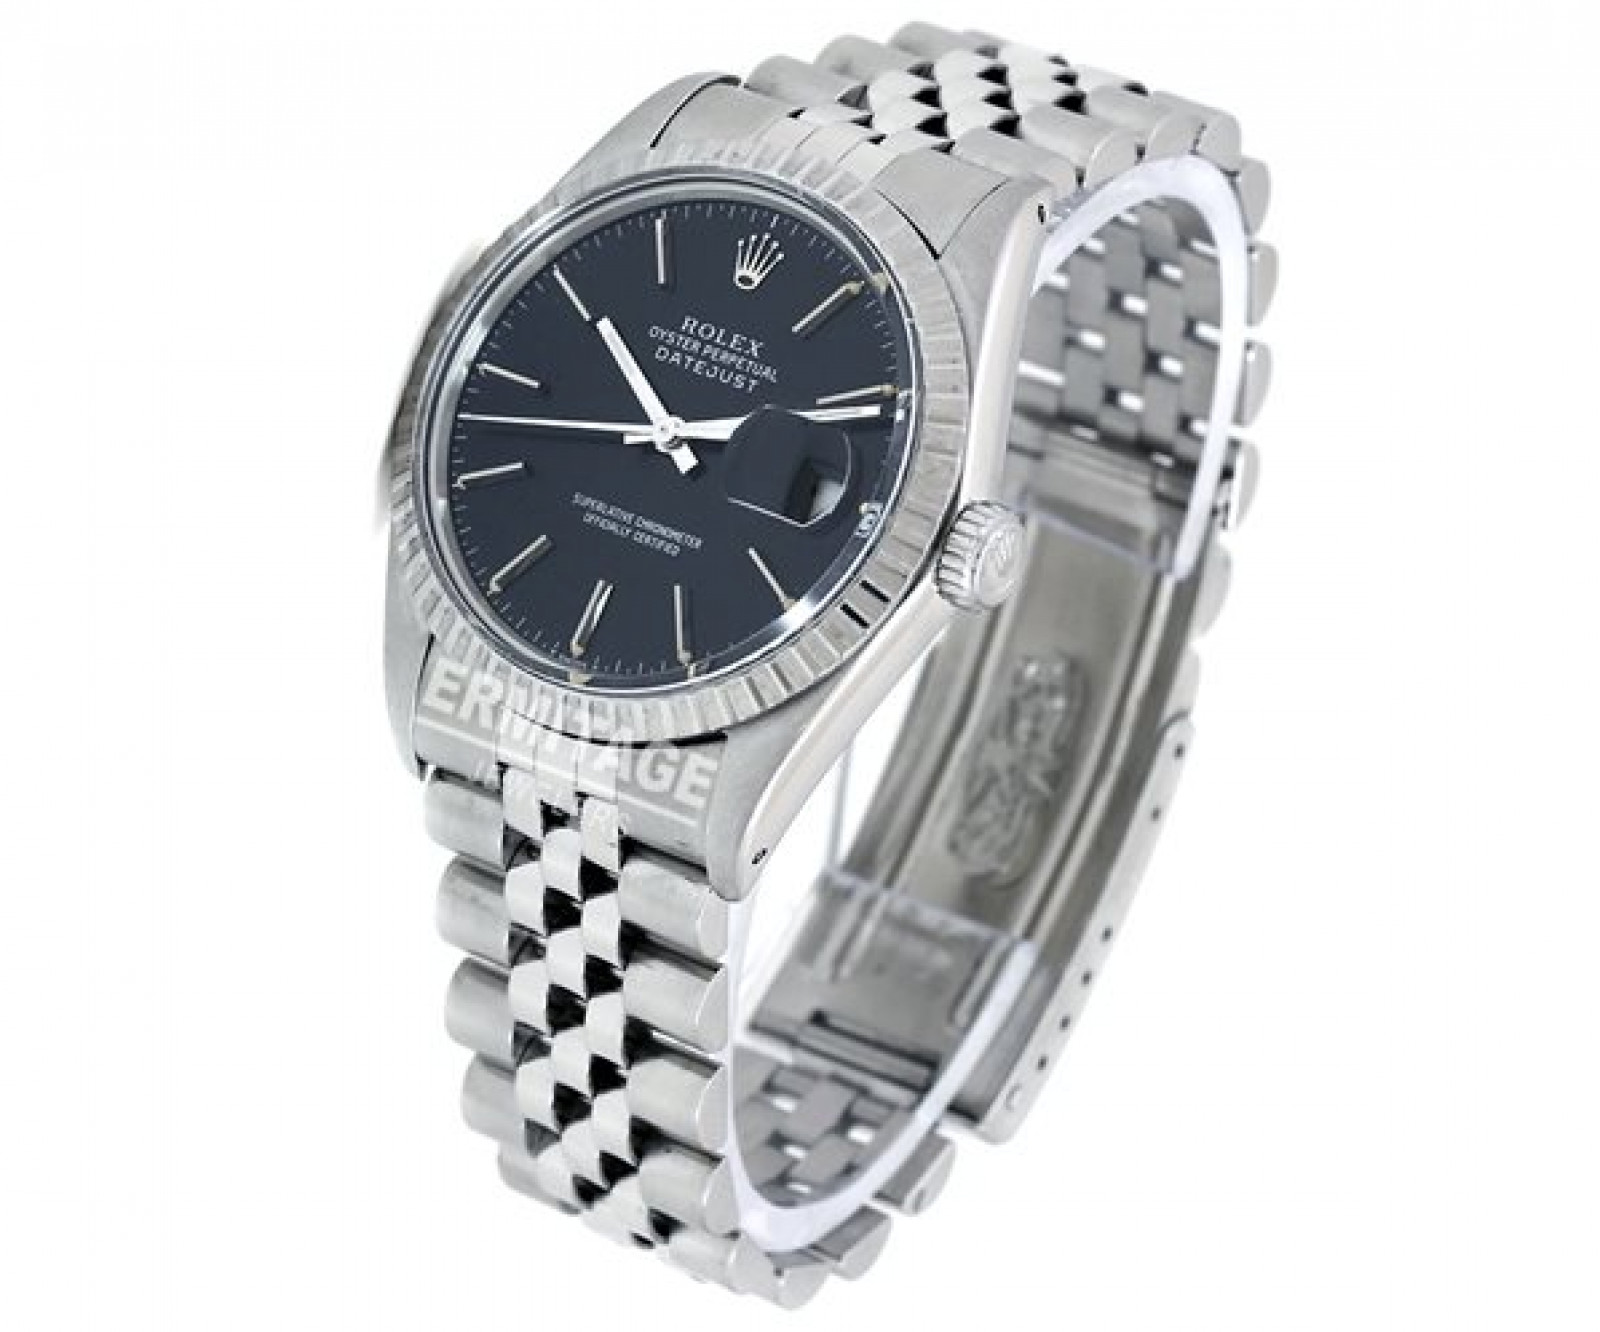 Pre-Owned Rolex Datejust 16014